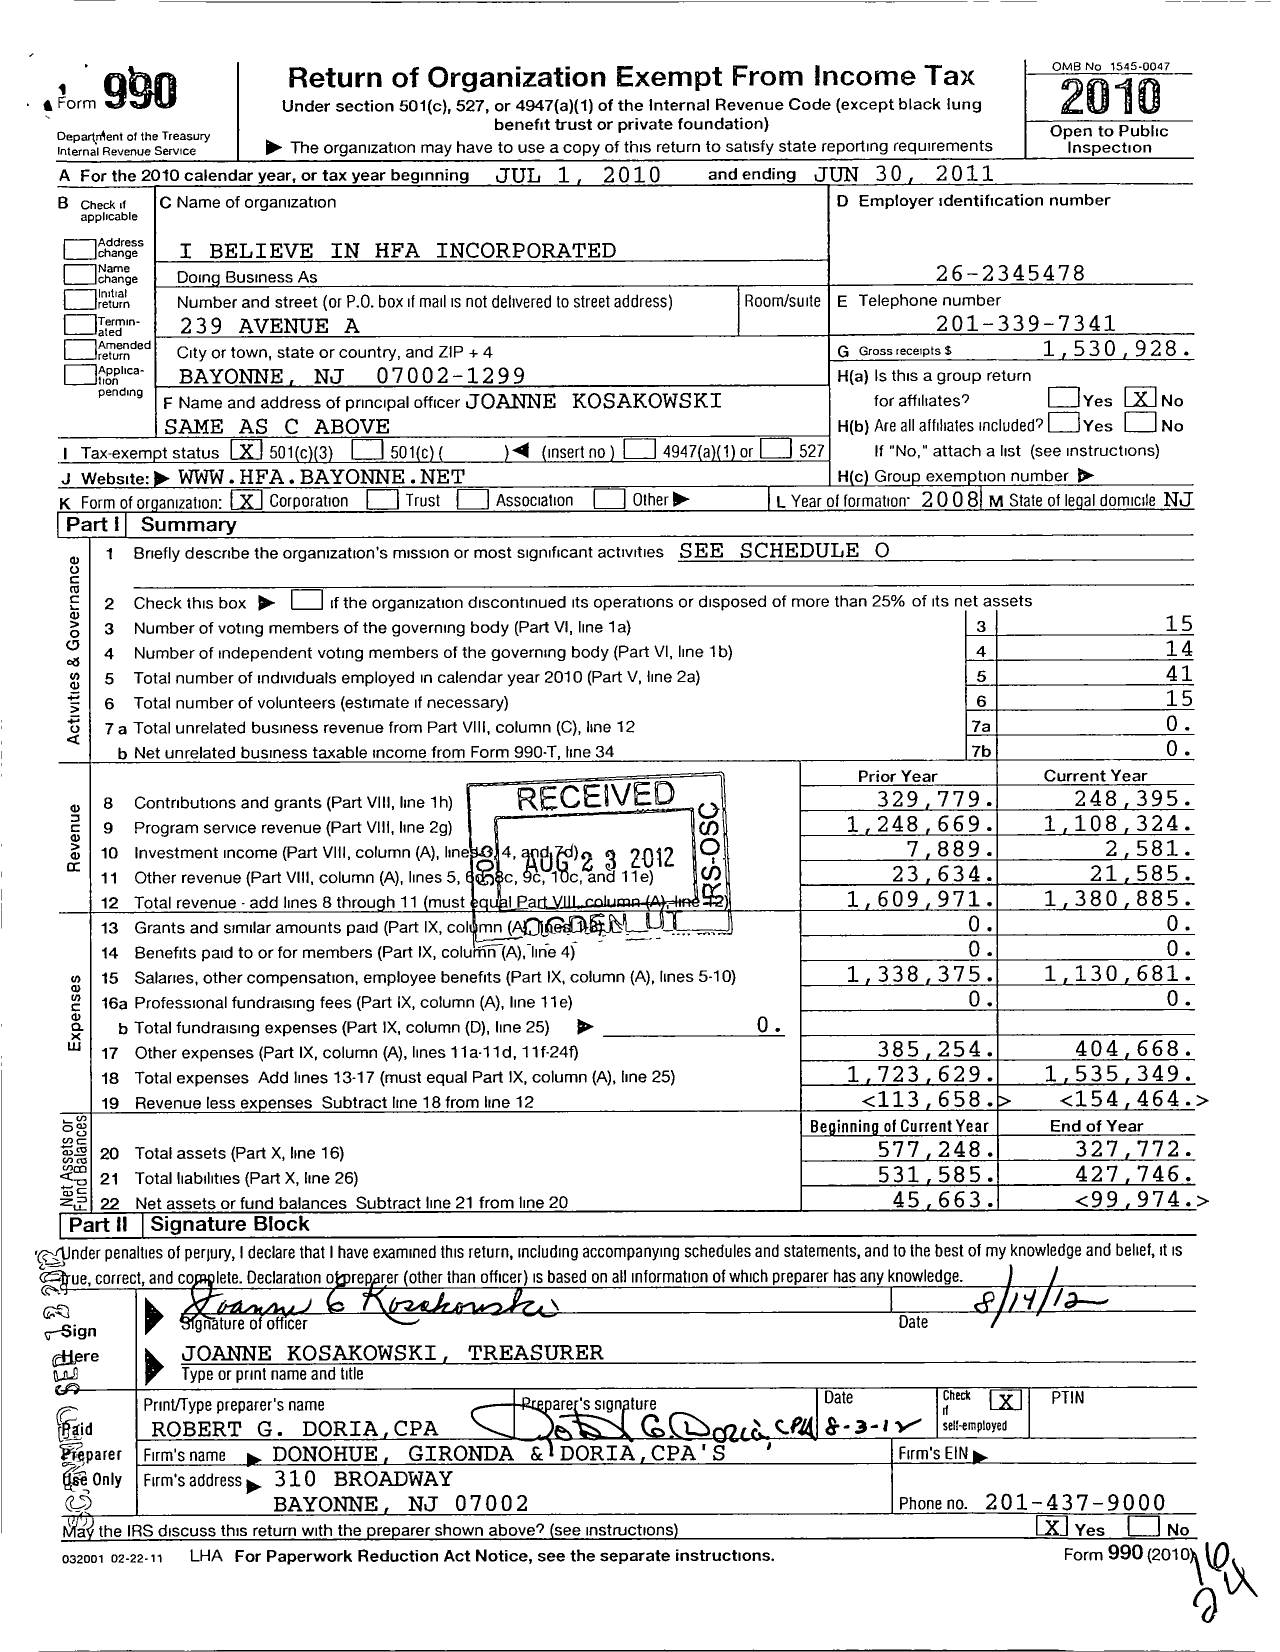 Image of first page of 2010 Form 990 for I Believe in Hfa